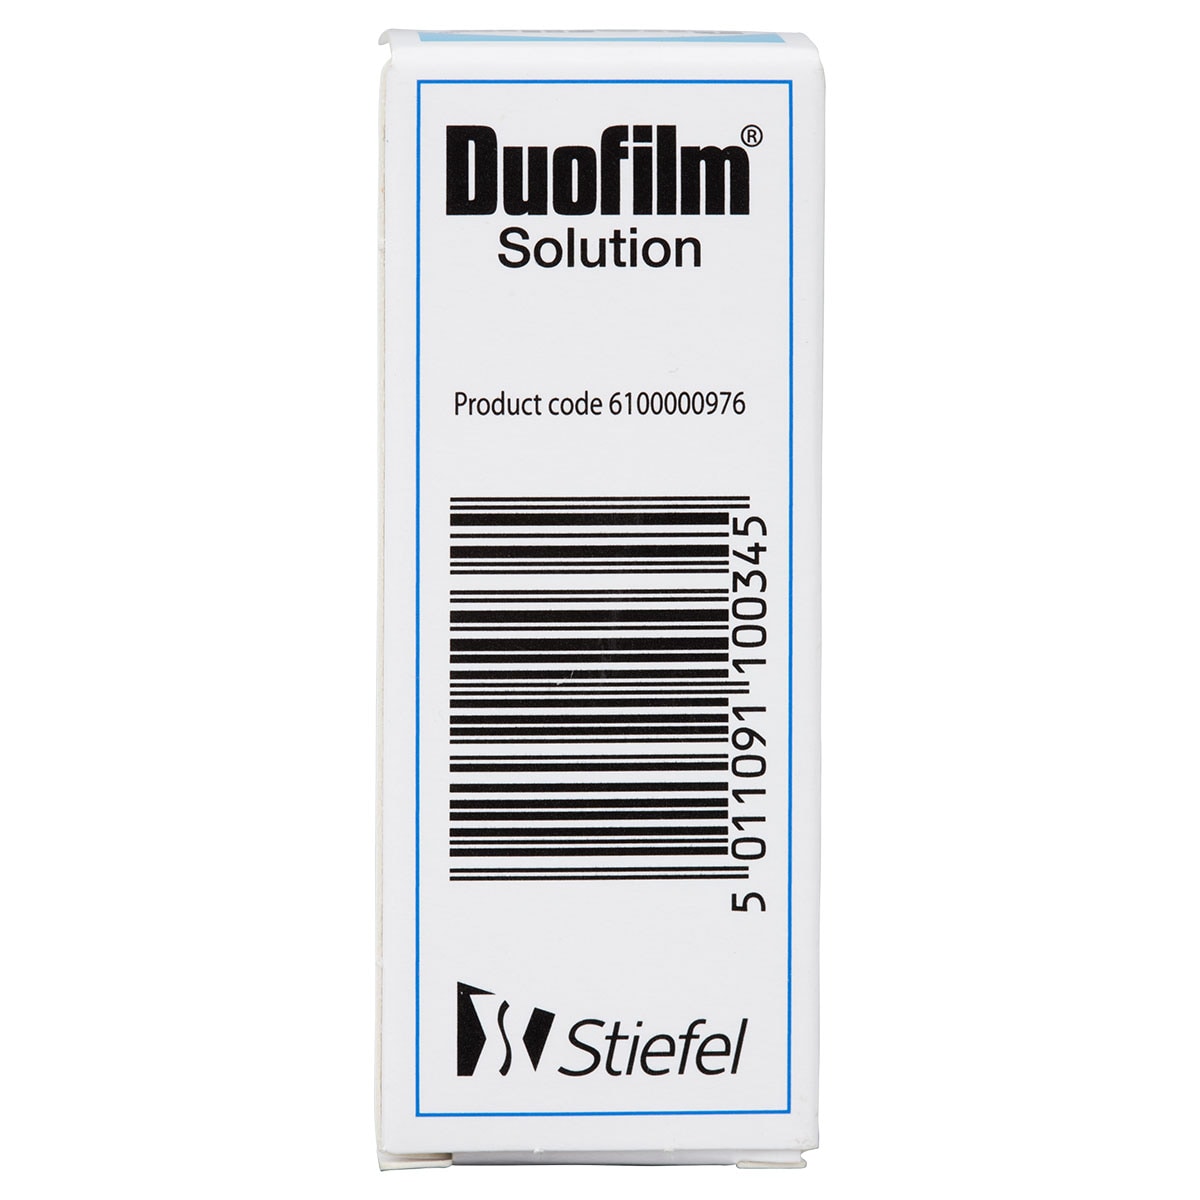 Duofilm Solution for the Treatment of Warts 15ml